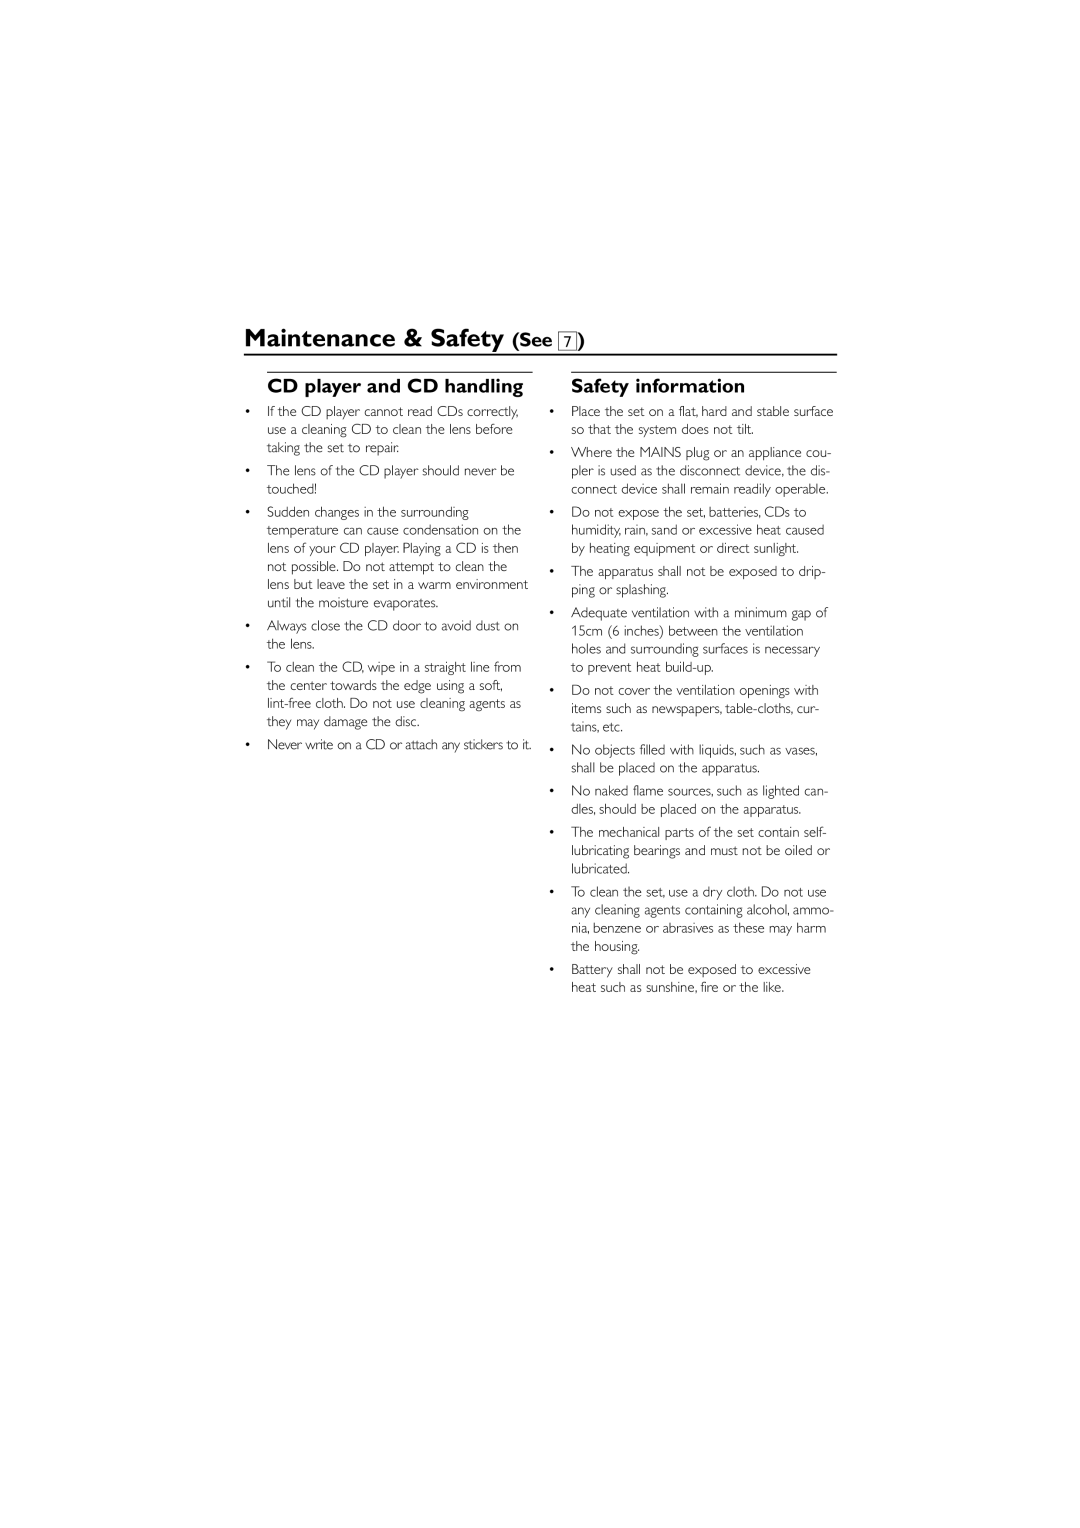 Philips AZ1845 user manual Maintenance & Safety See, CD player and CD handling, Safety information 